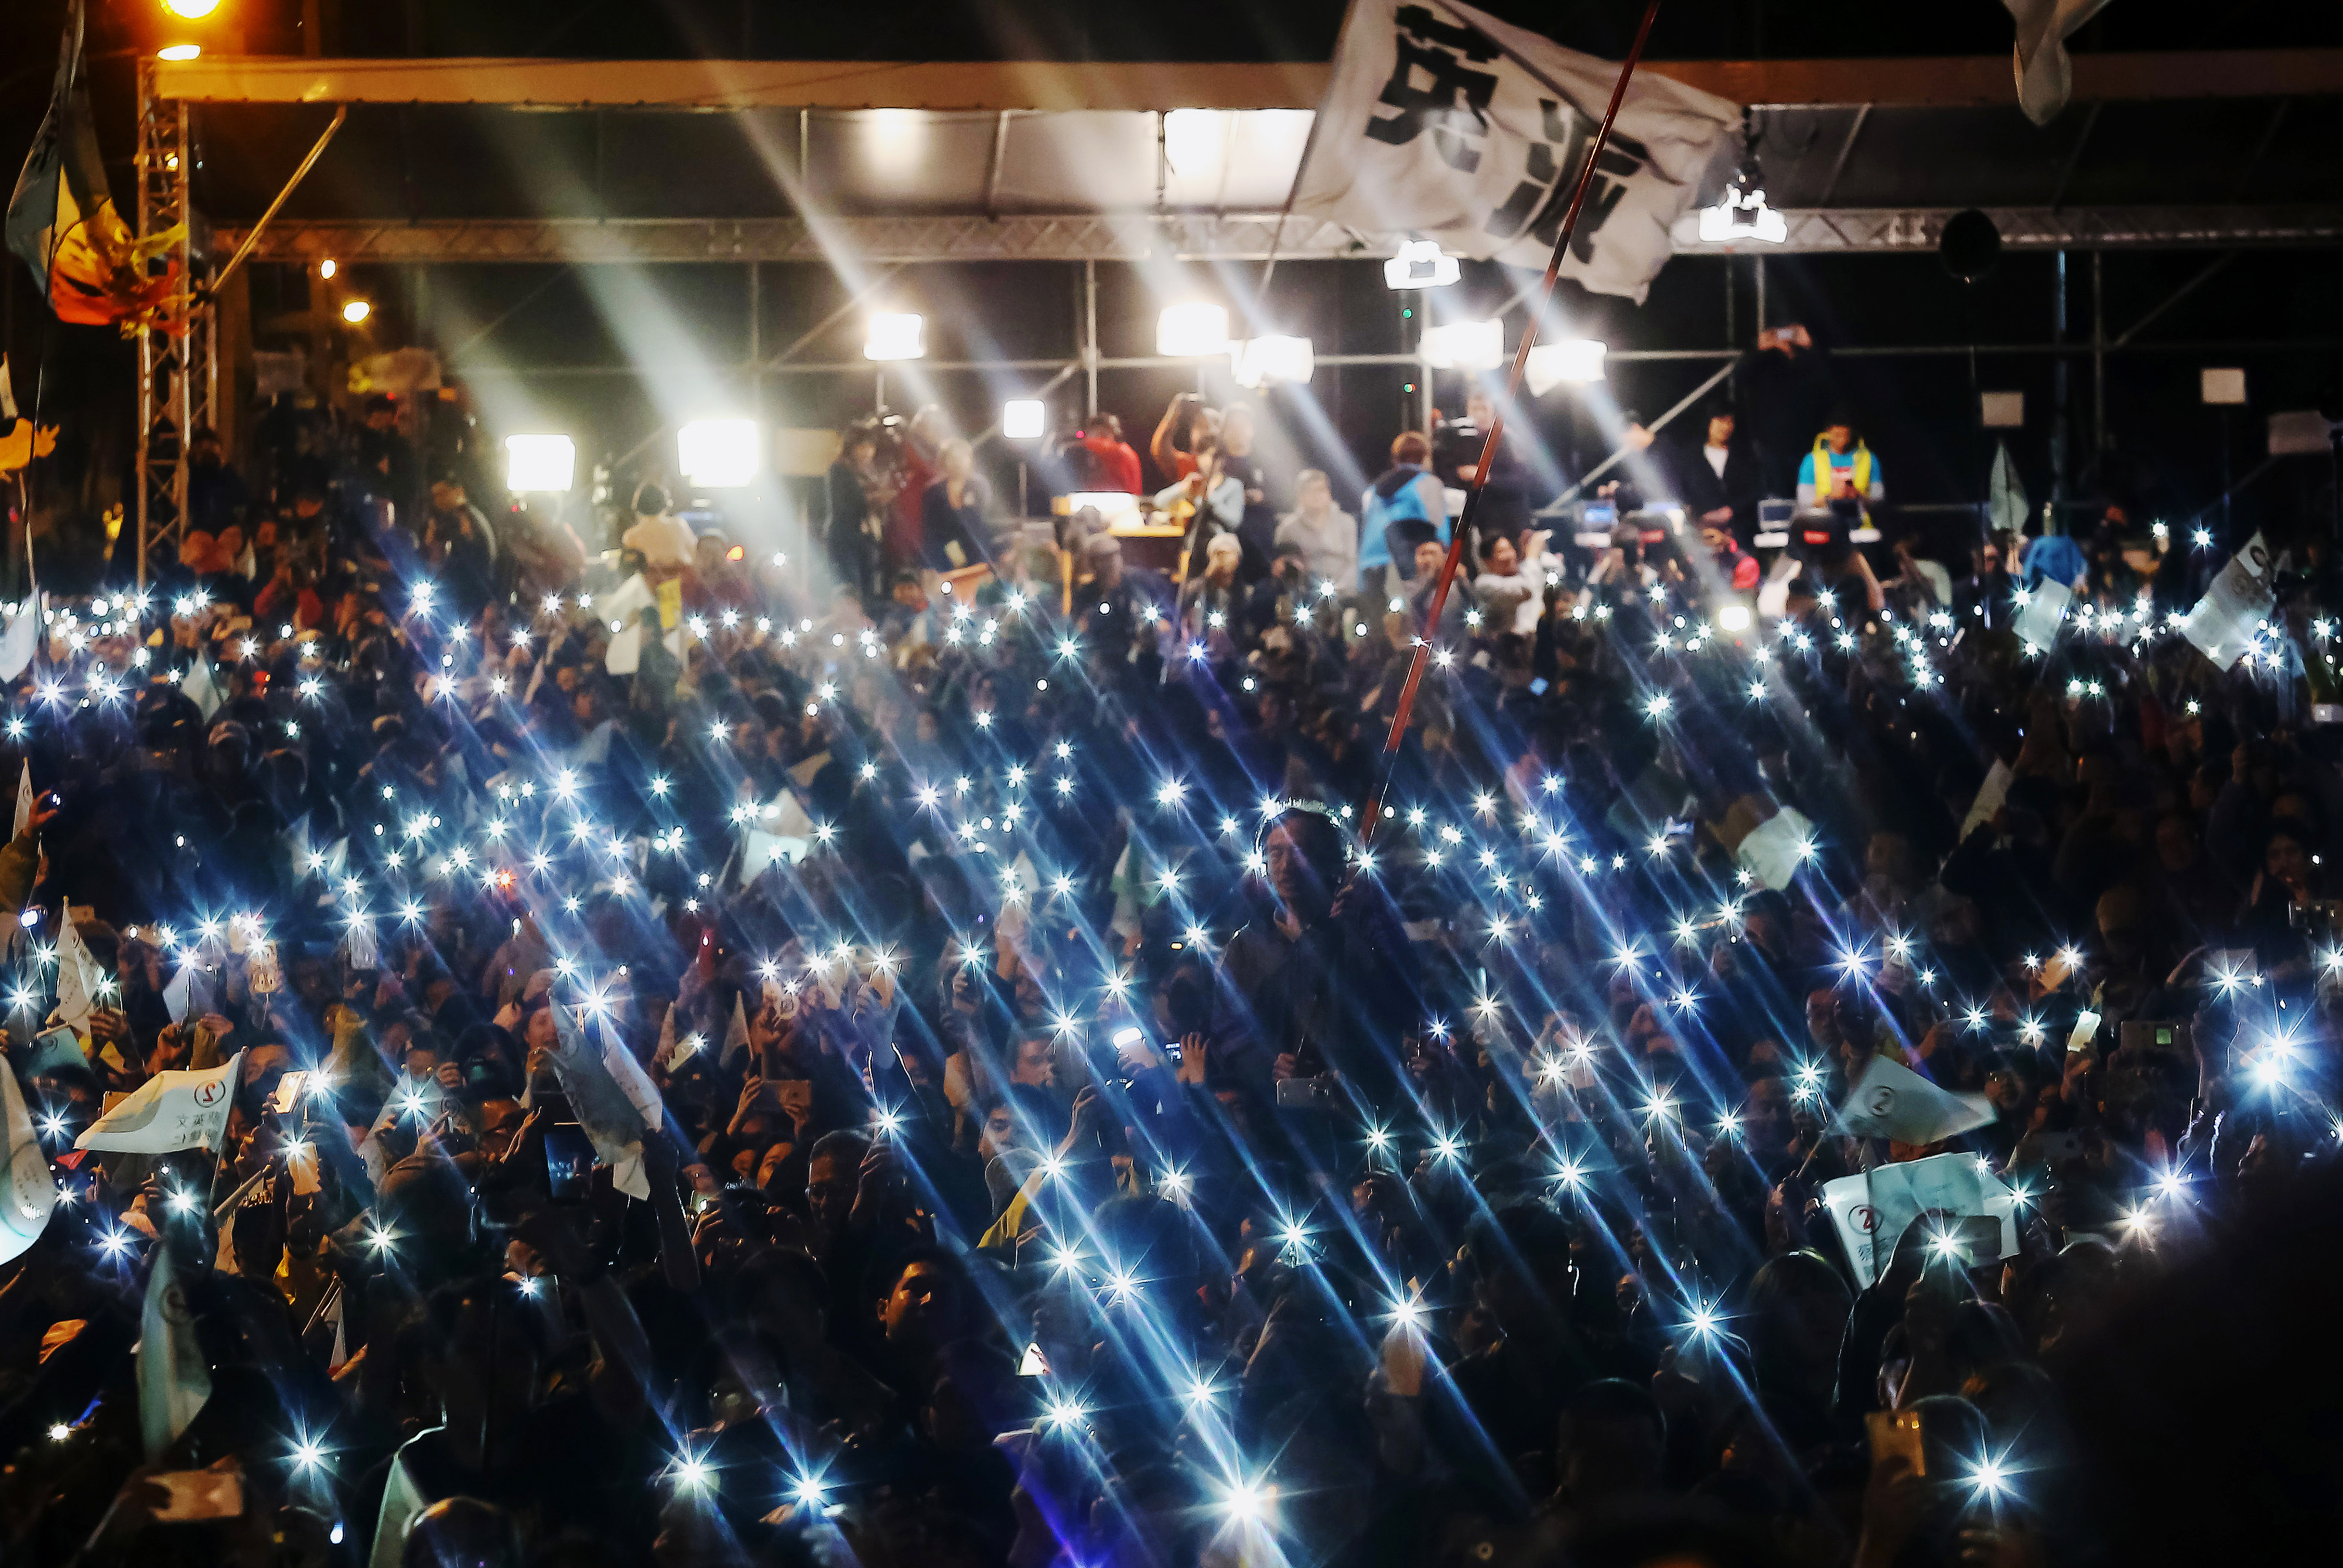 Democratic Progressive Party (DPP) supporters shine lights from their mobile devices as they celebrate election results during a rally in Taipei, Taiwan, on Saturday, Jan. 16, 2016. Taiwan opposition leader Tsai Ing-wen rode a tide of discontent over everything from China ties to economic growth to become the islands first female president and secure a historic legislative majority for her Democratic Progressive Party. Photographer: Maurice Tsai/Bloomberg ORG XMIT: 600236675